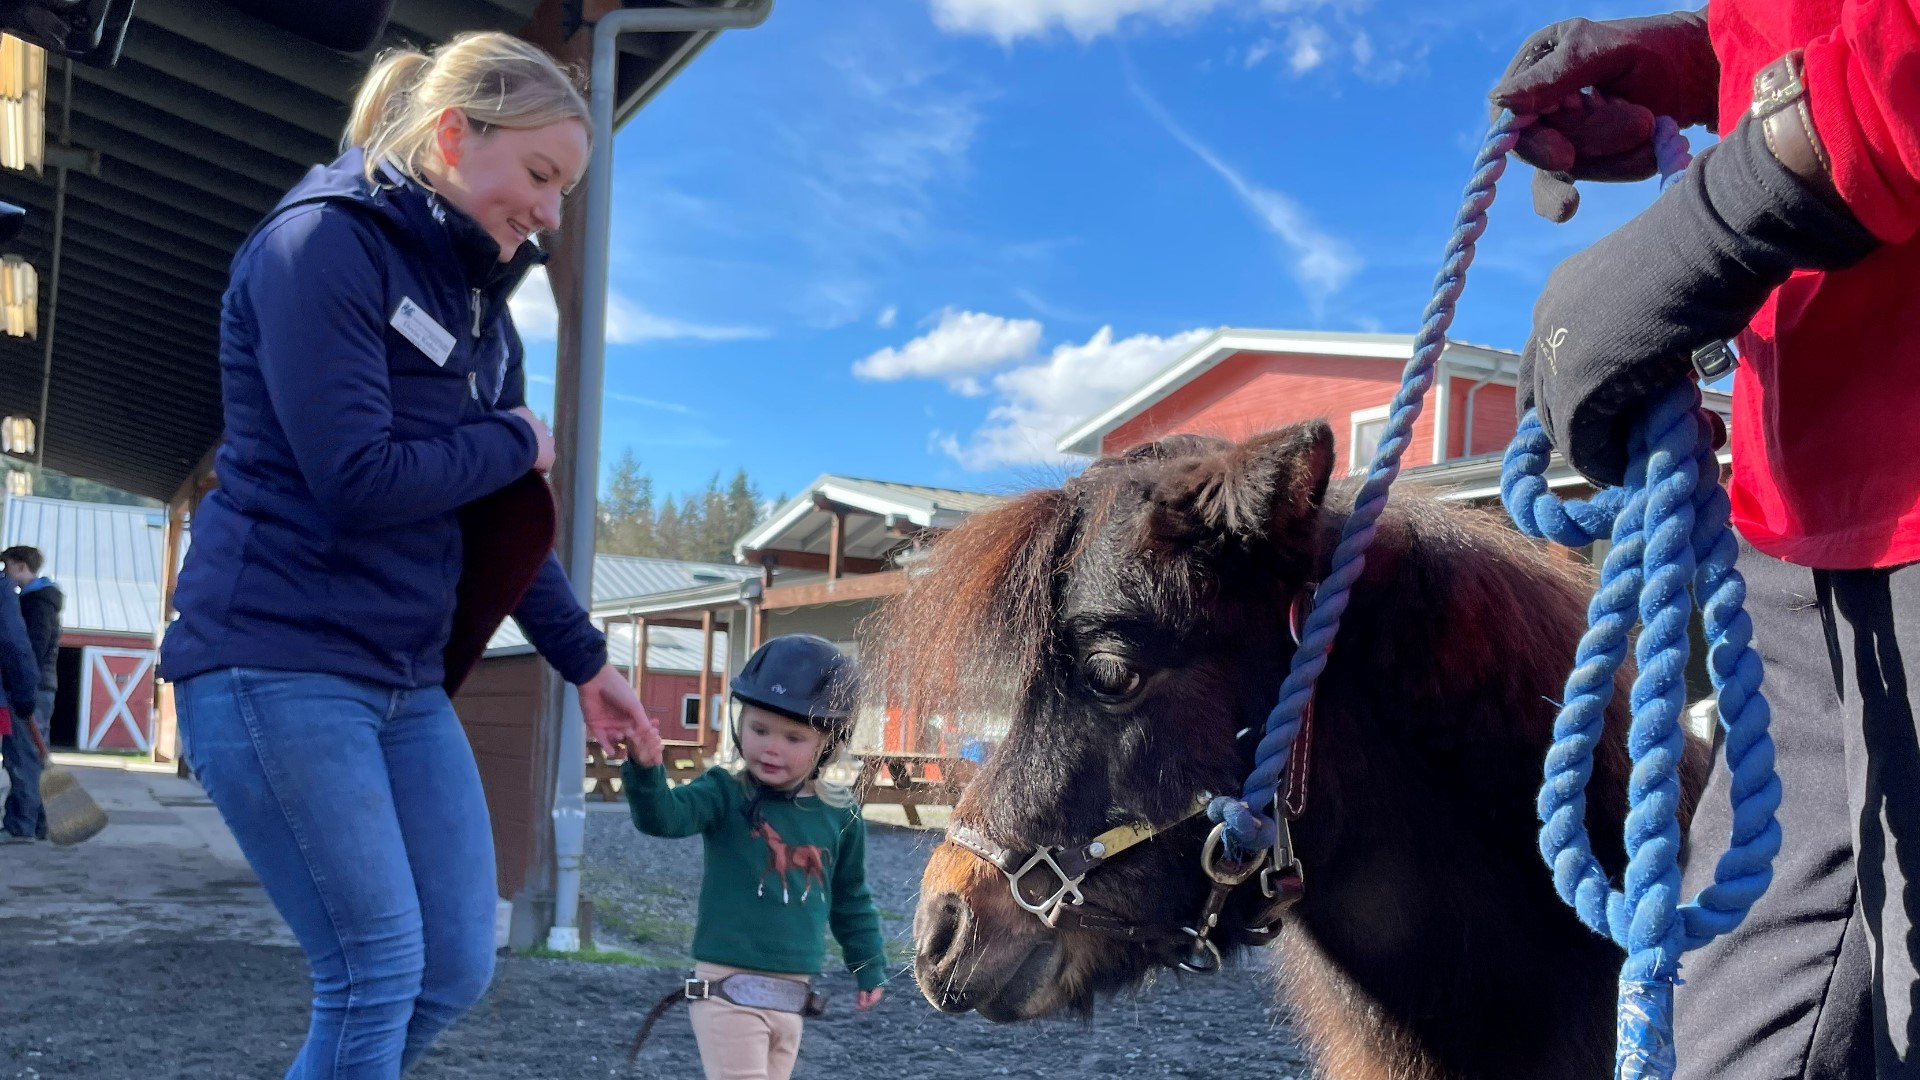 At Little Bit Therapeutic Riding Center horsepower has been helping people with disabilities since 1976.